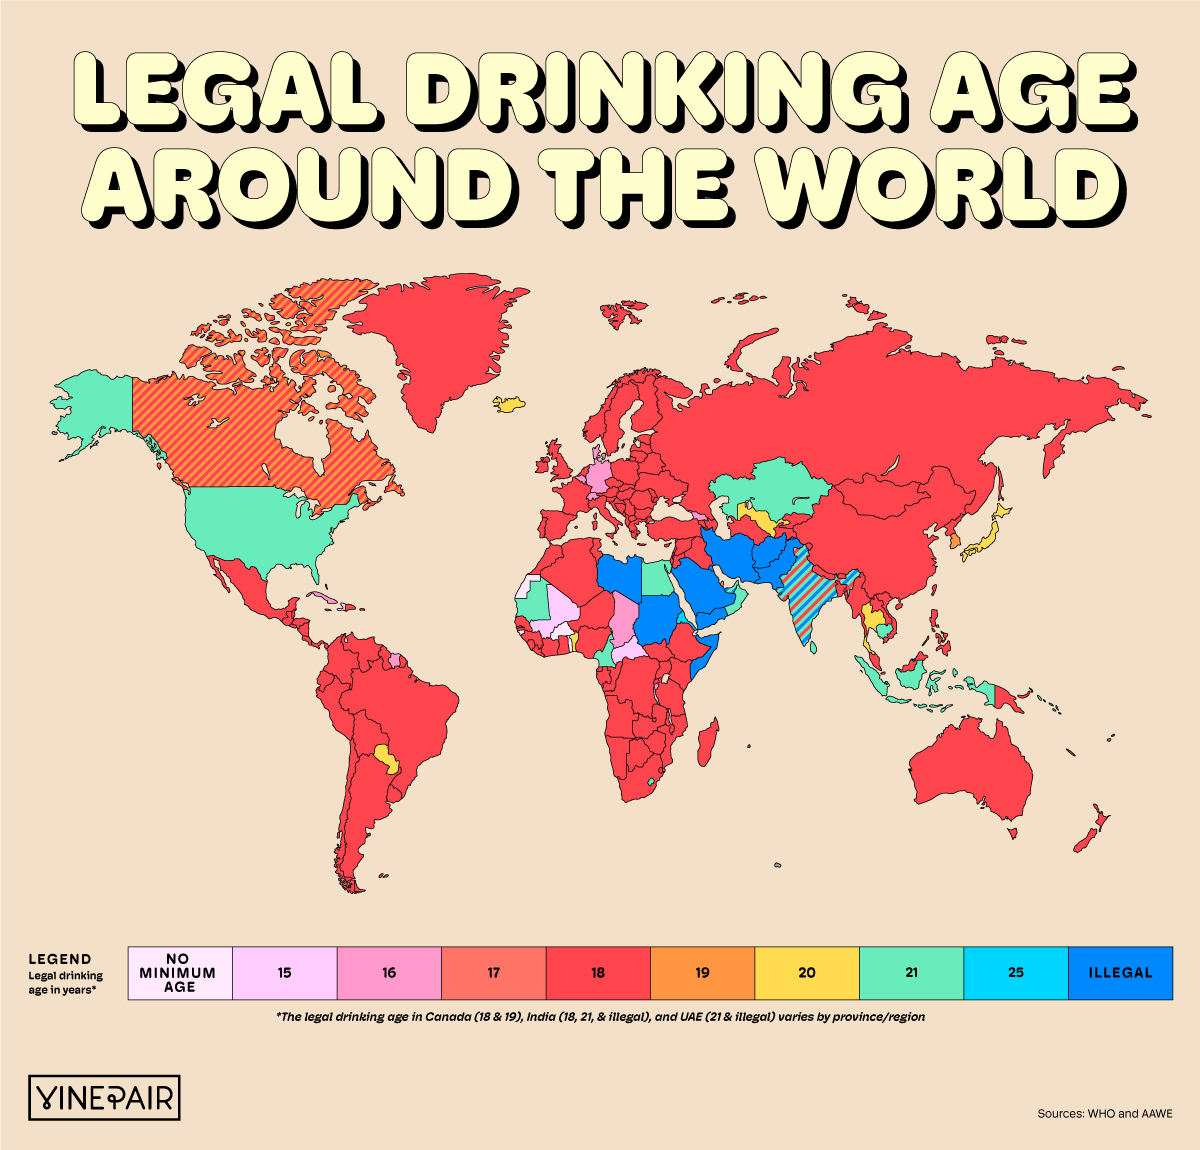 A map of The Legal Drinking Age in Each Country